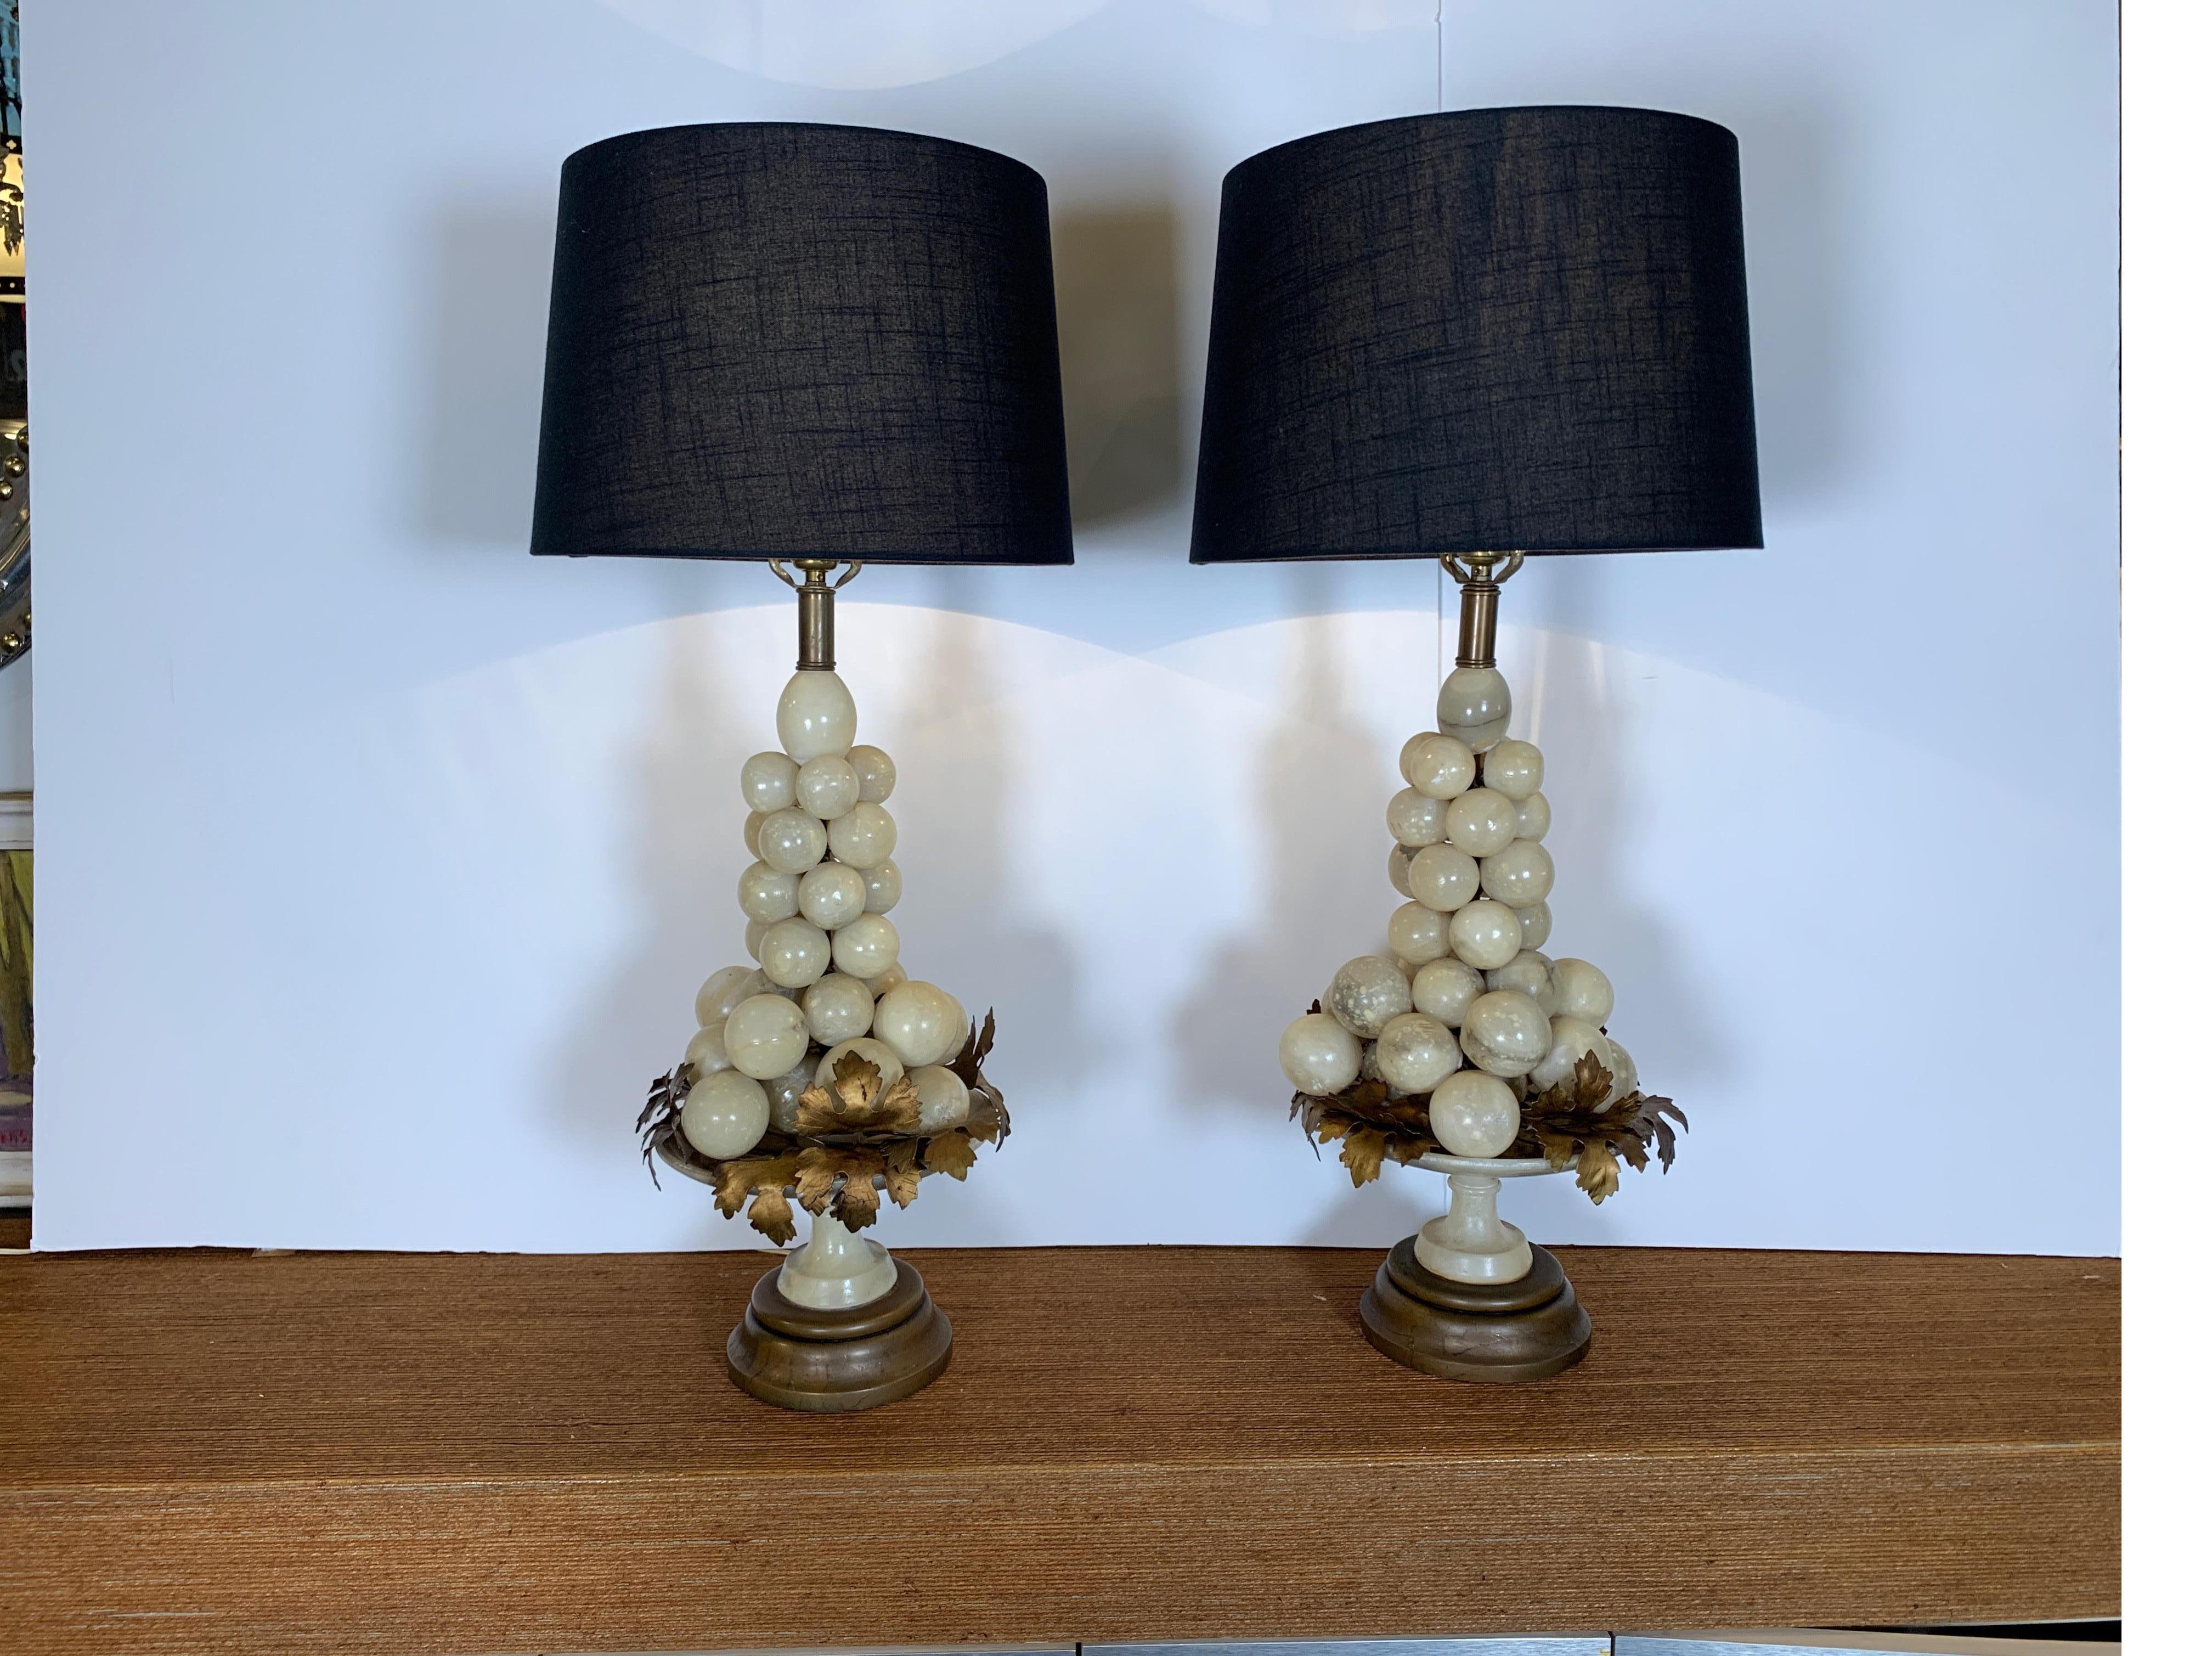 A whimsical and stylish pair of polished alabaster lamps. The lamps are a stacked grouping of stone grapes resting on gilt metal leaves with an alabaster compote style pedestal base on a wood bottom. Mid-20th century 26 inchest tall to the top of